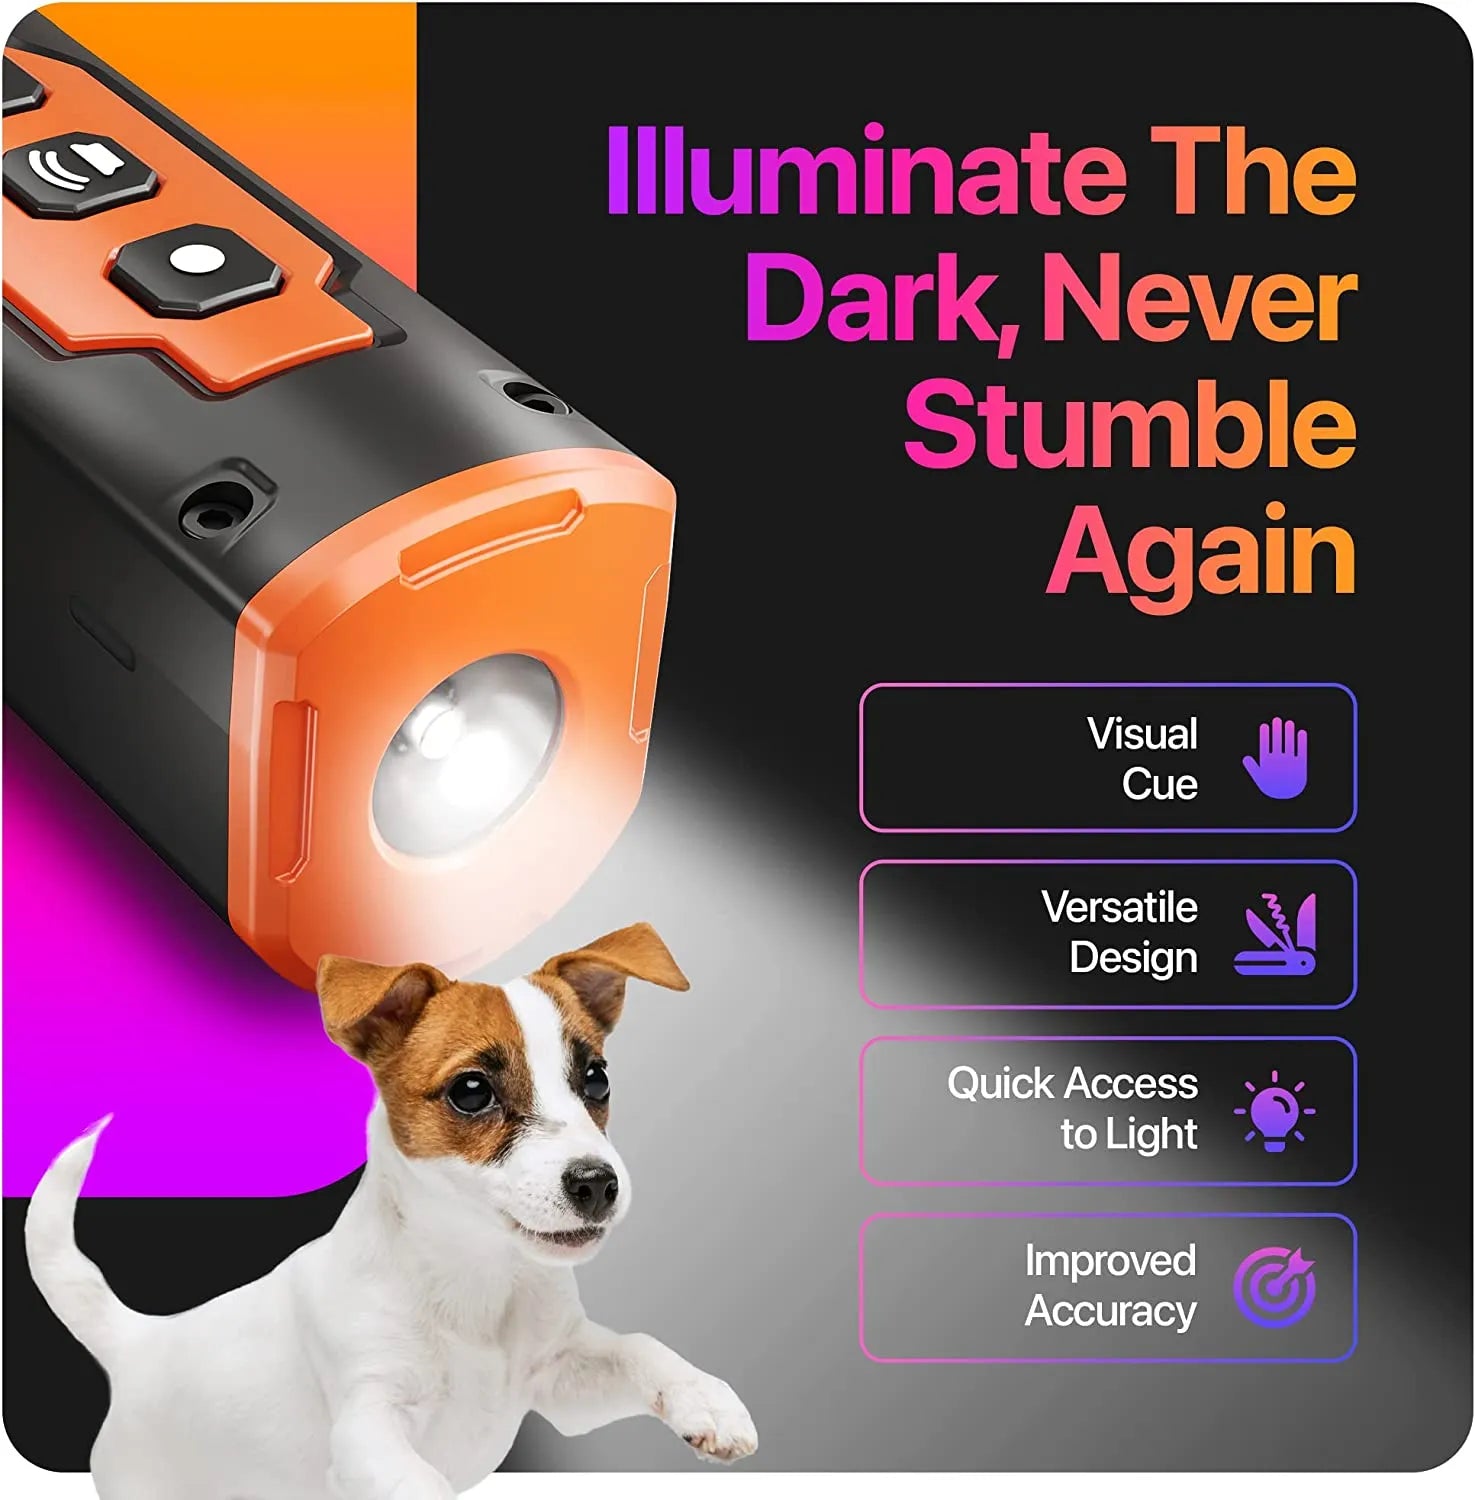 Ultrasonic Dog Repeller and Trainer